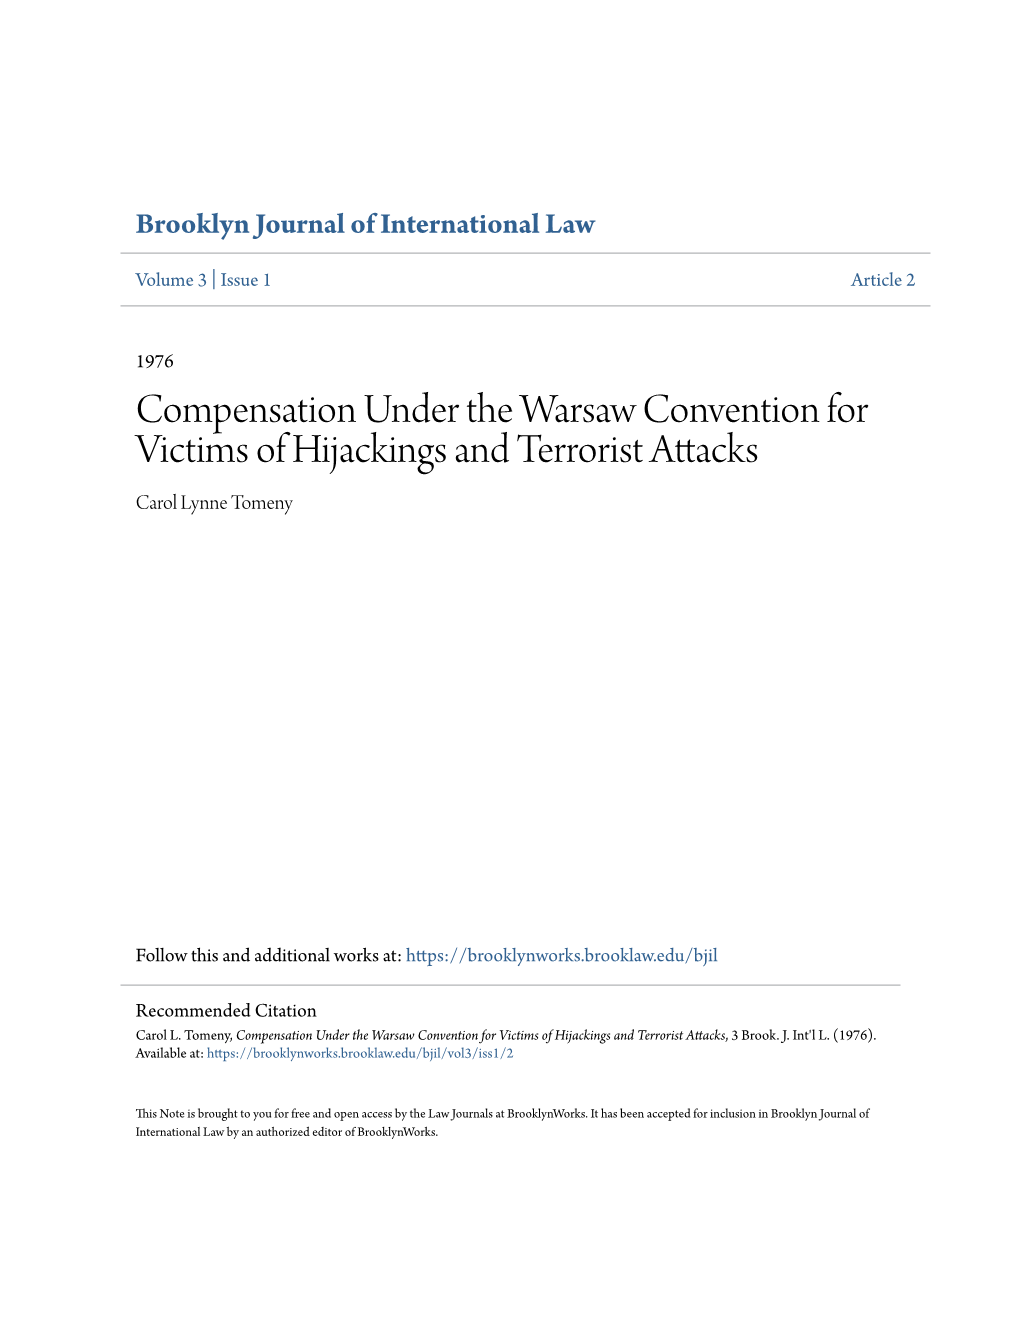 Compensation Under the Warsaw Convention for Victims of Hijackings and Terrorist Attacks Carol Lynne Tomeny